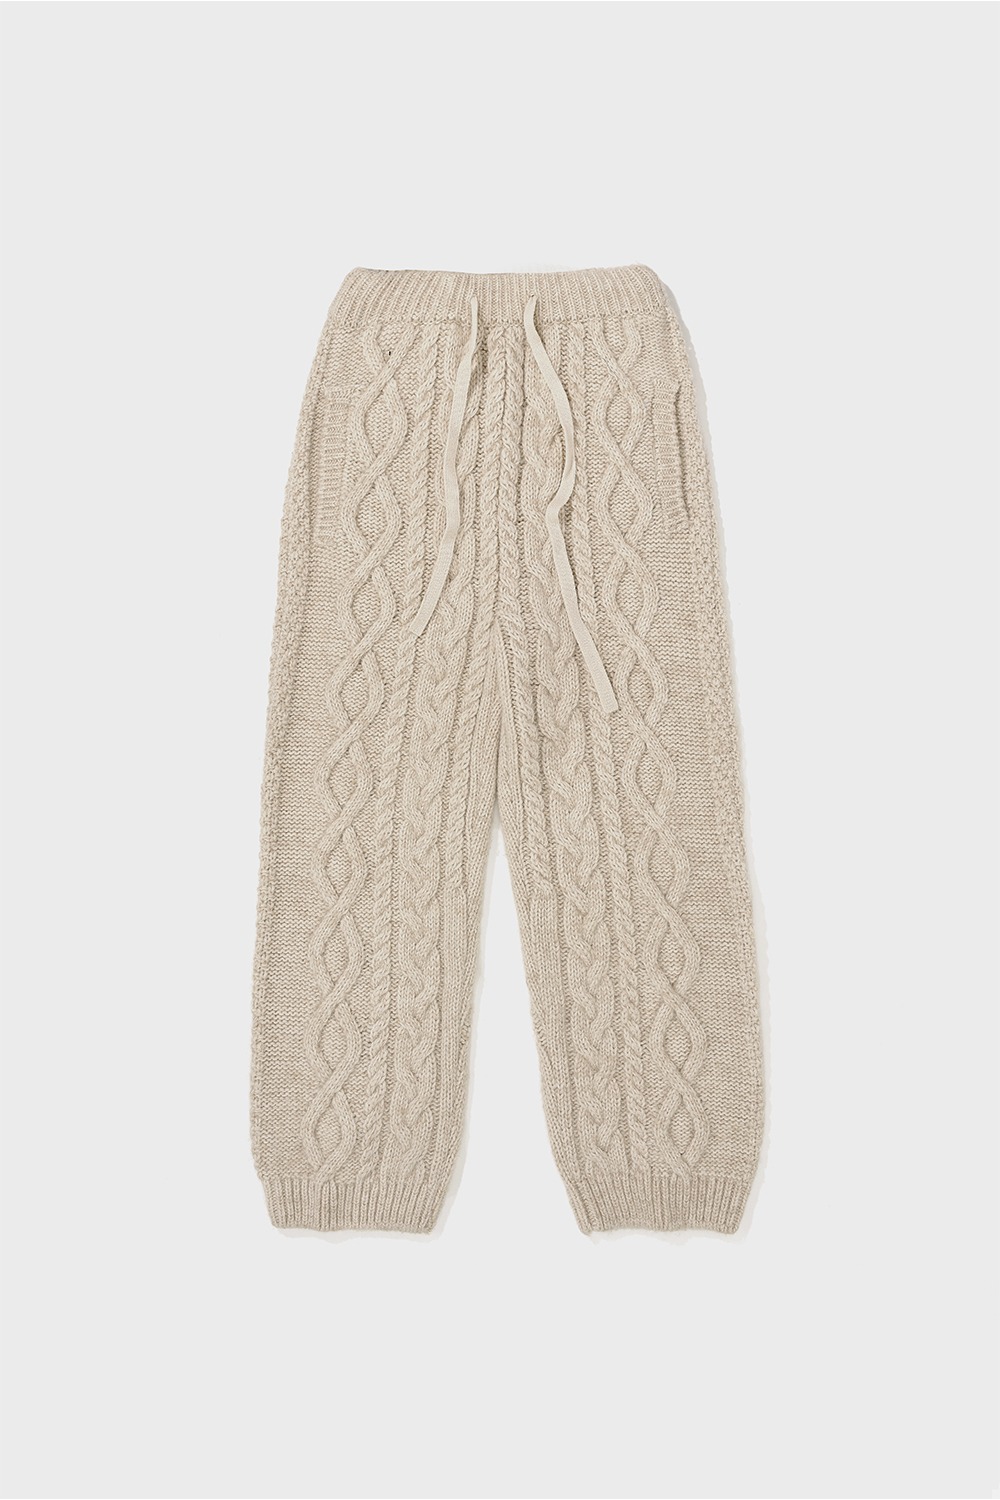 22FW CABLE JOGGER PANTS - BEIGE